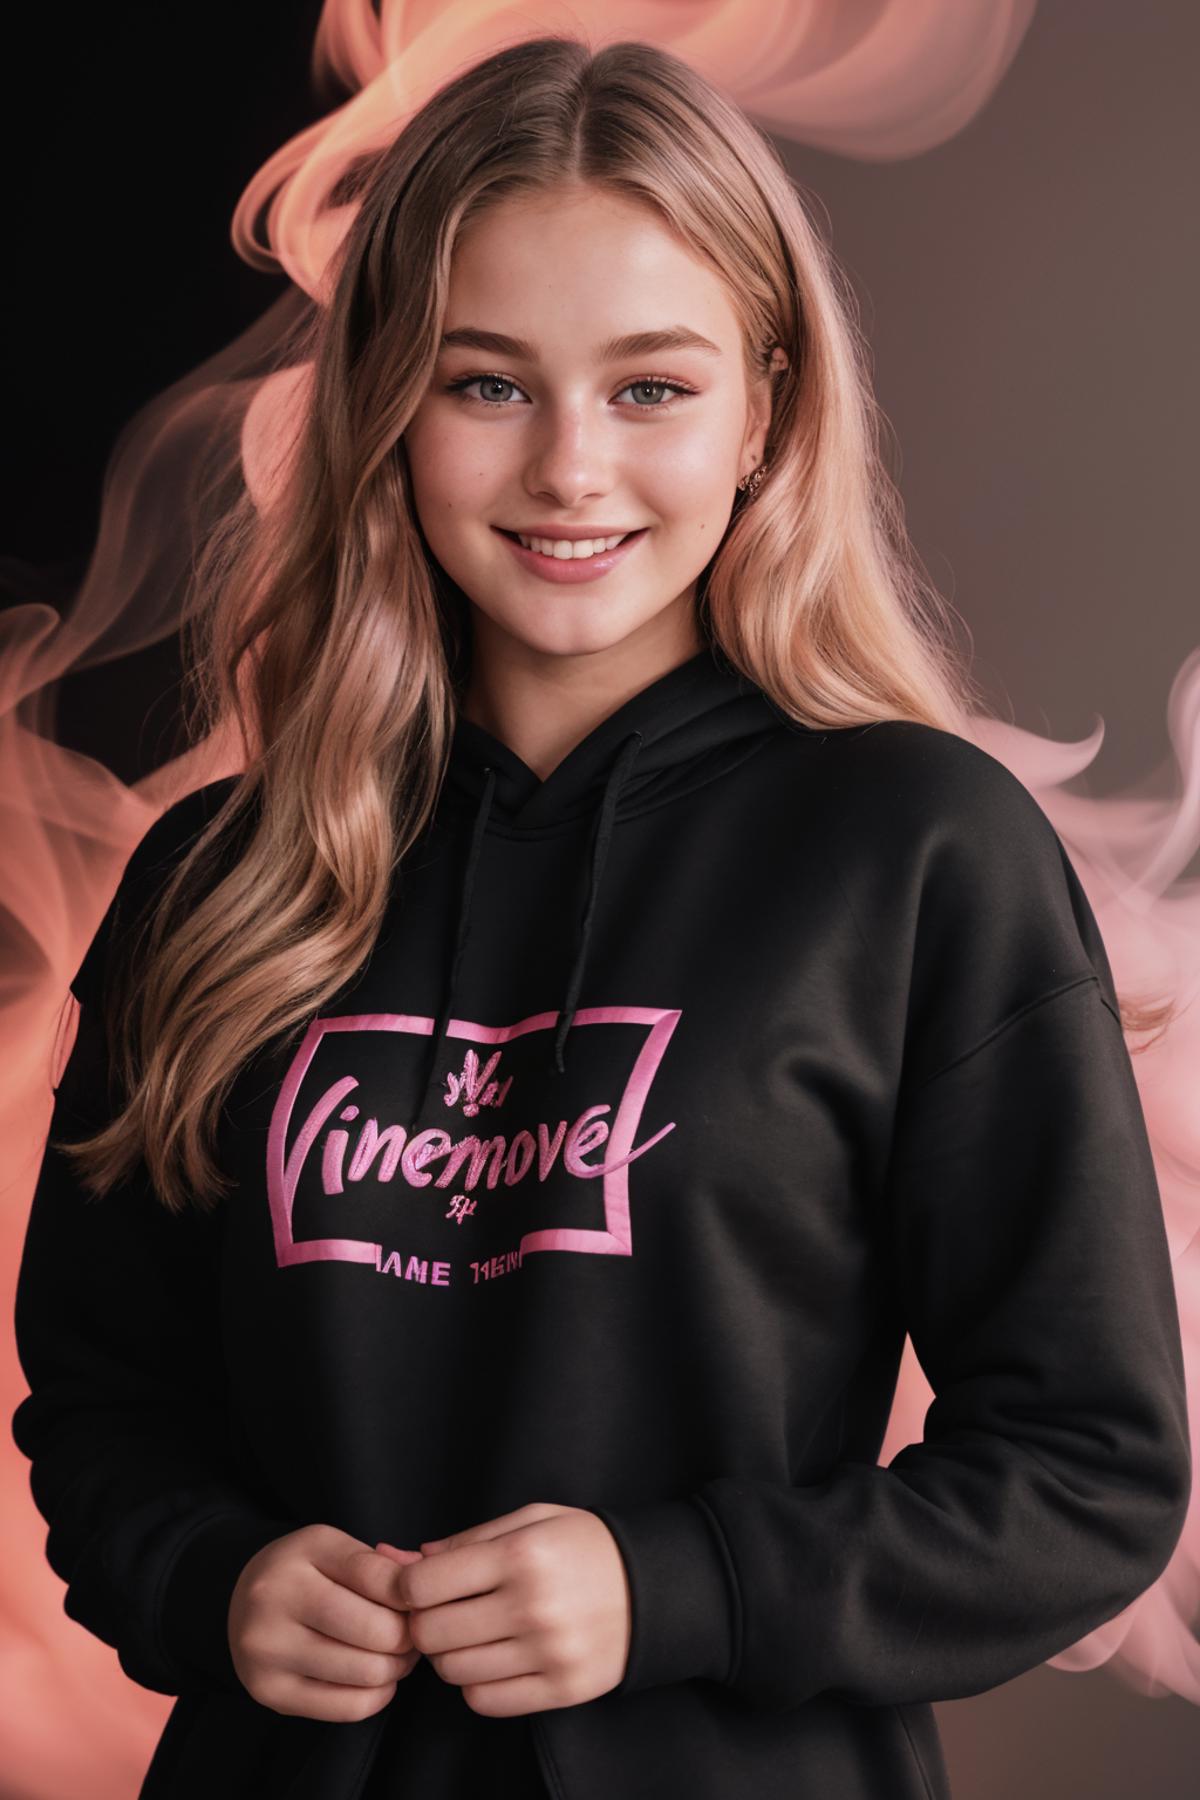 A blonde woman wearing a black hoodie with a pink logo posing for a picture.